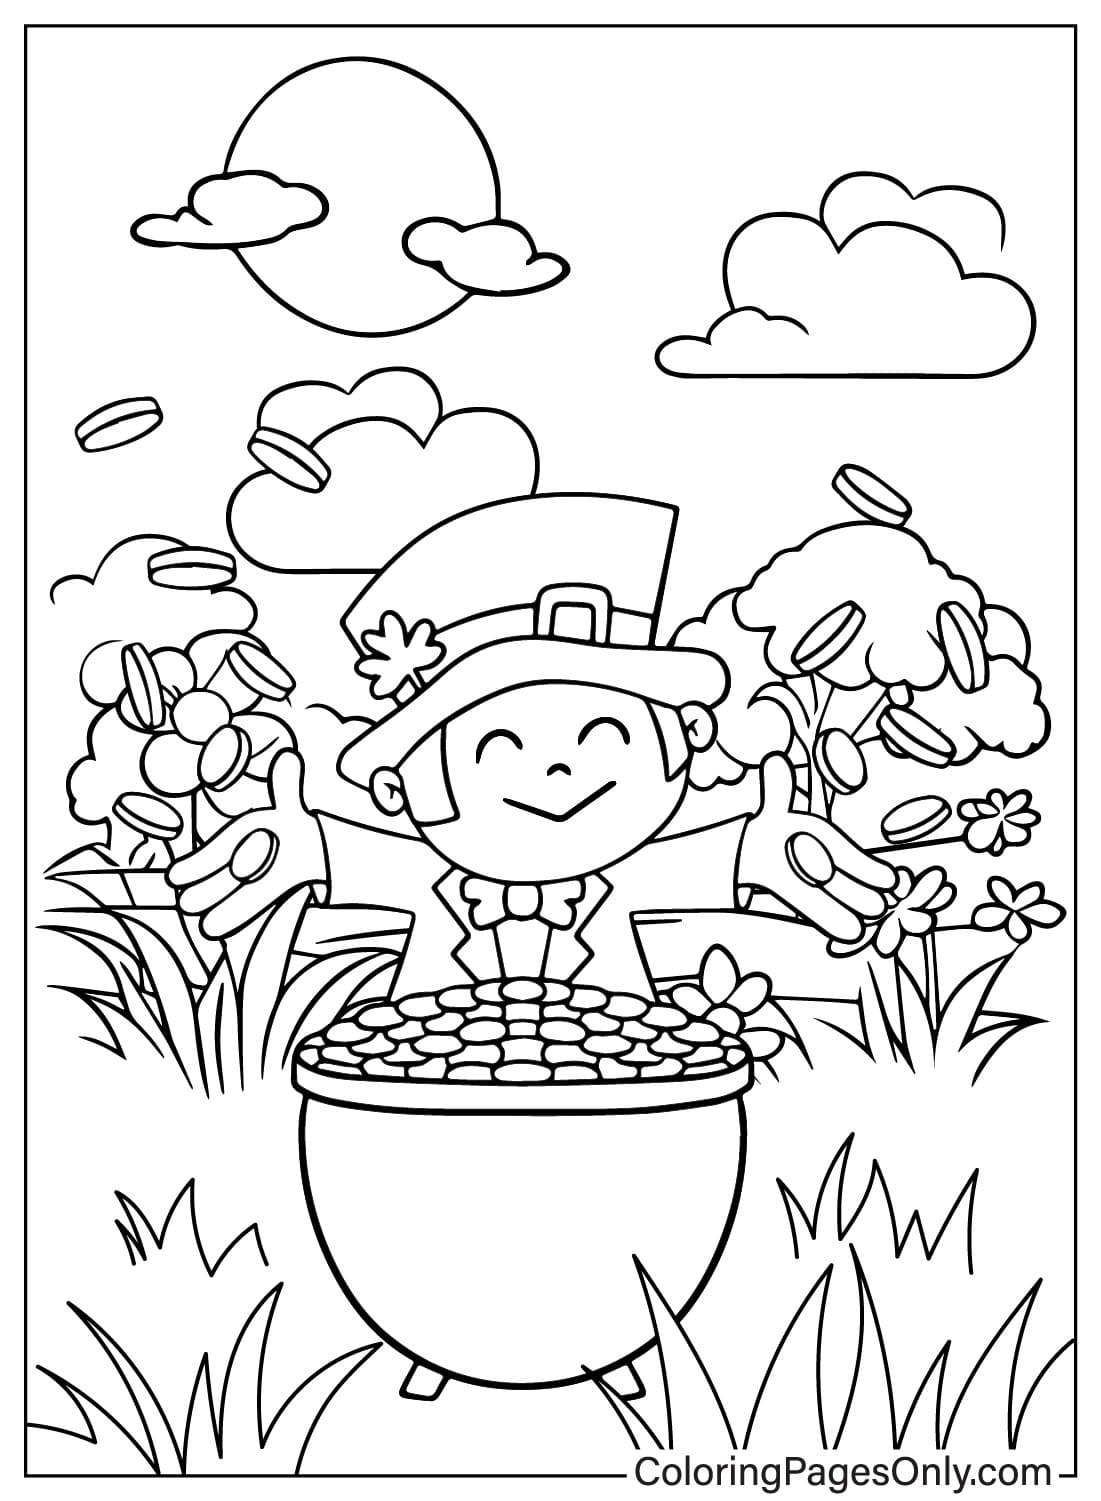 Pot of Gold Coloring Page Free